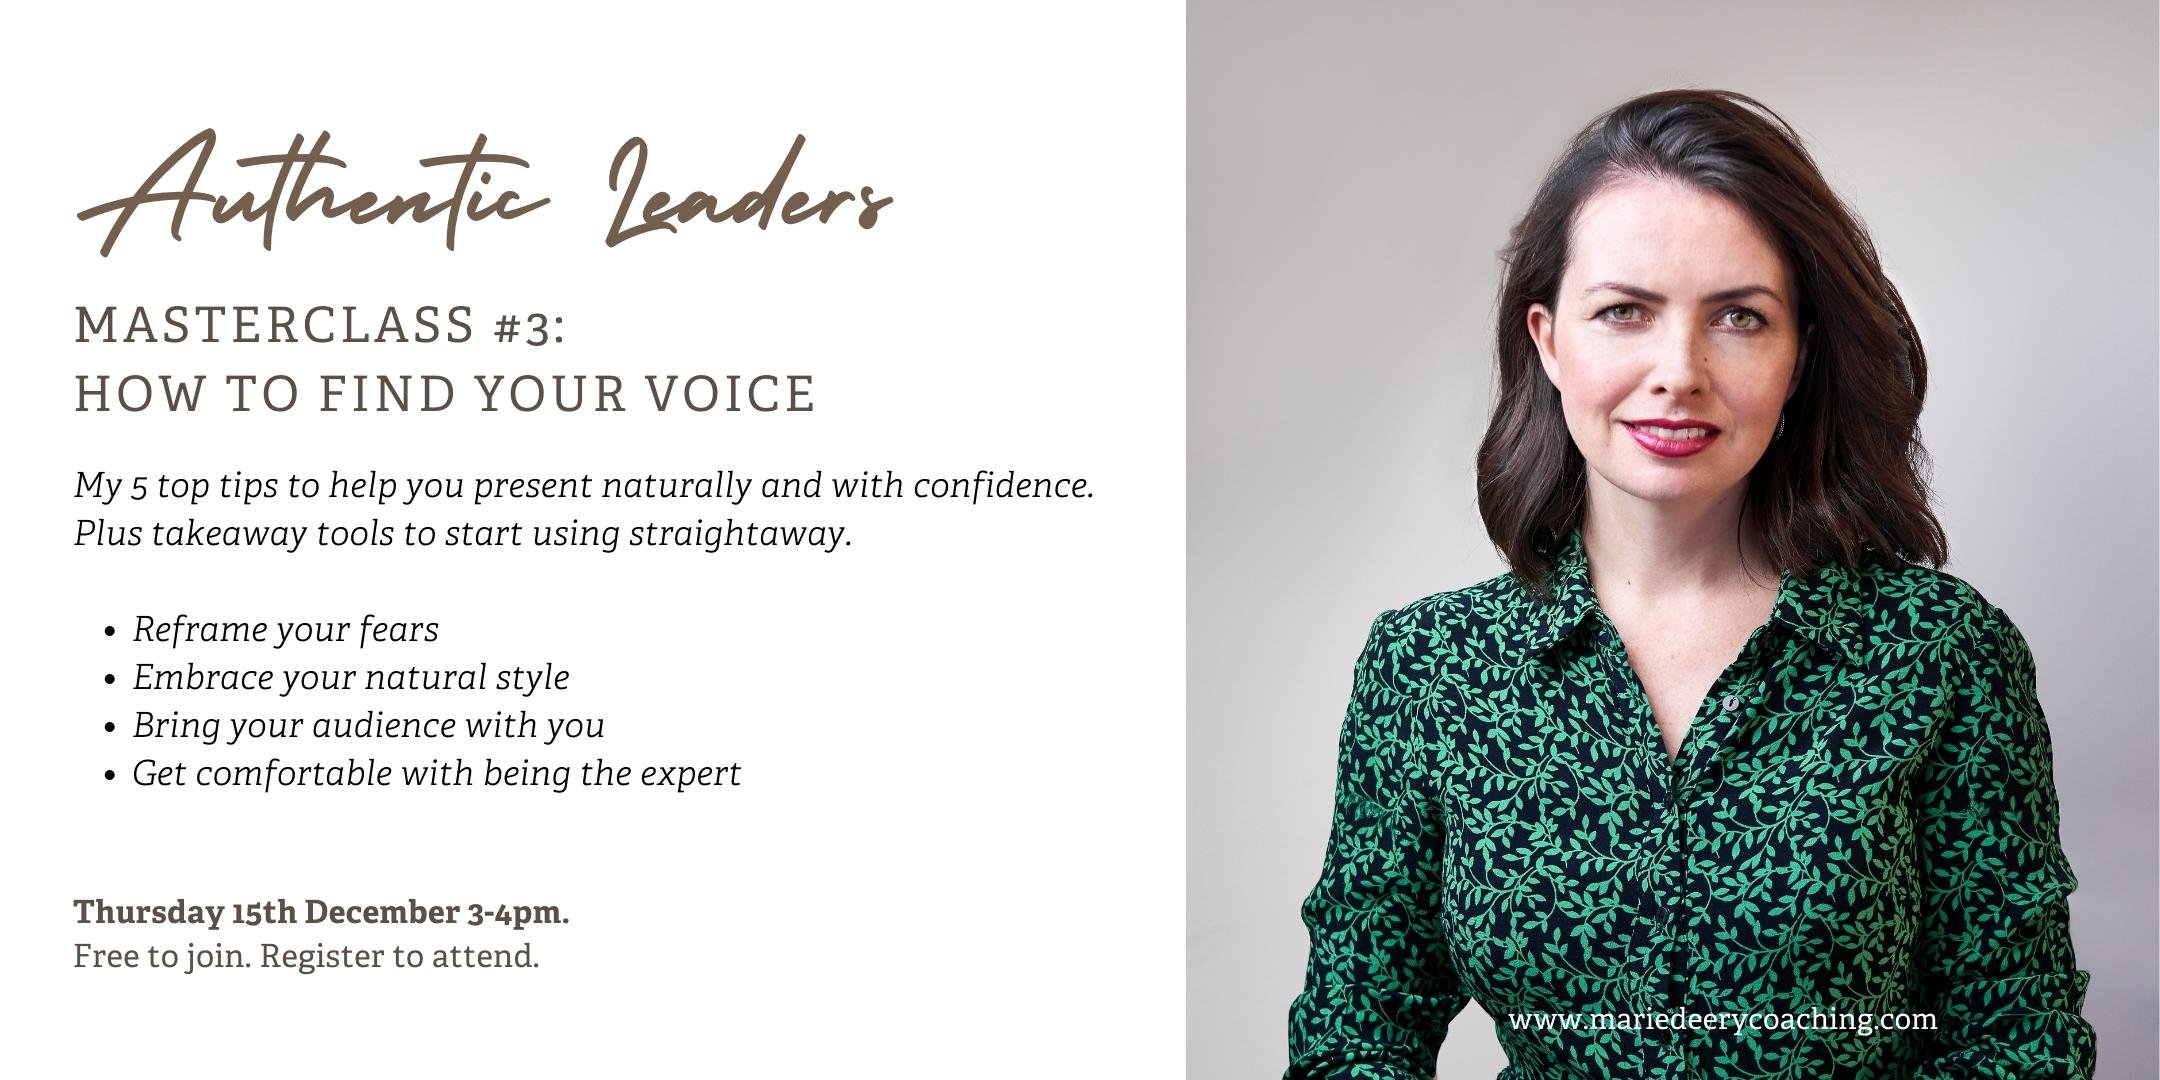 Authentic Leaders #3: HOW TO FIND YOUR VOICE